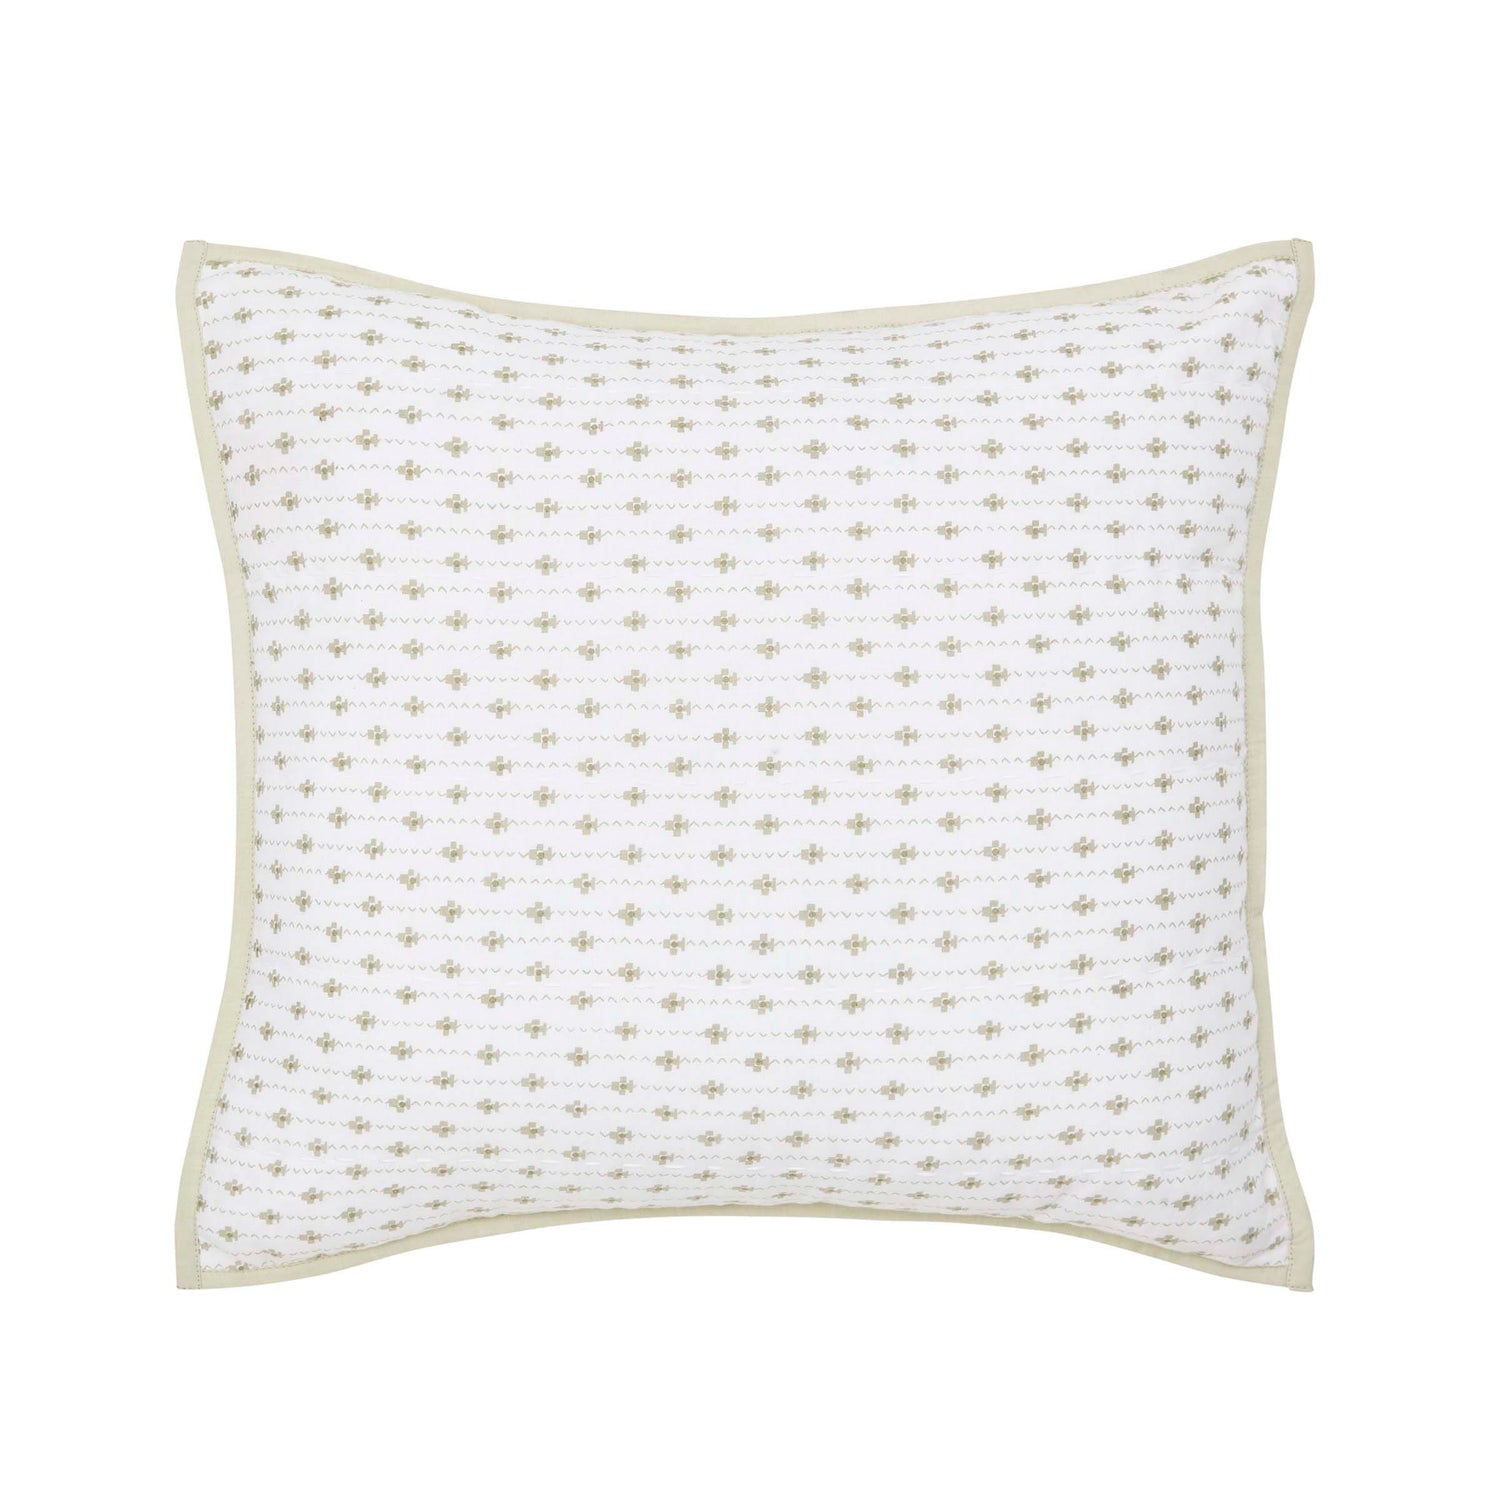 White and Green Patterned Murmur Cushion